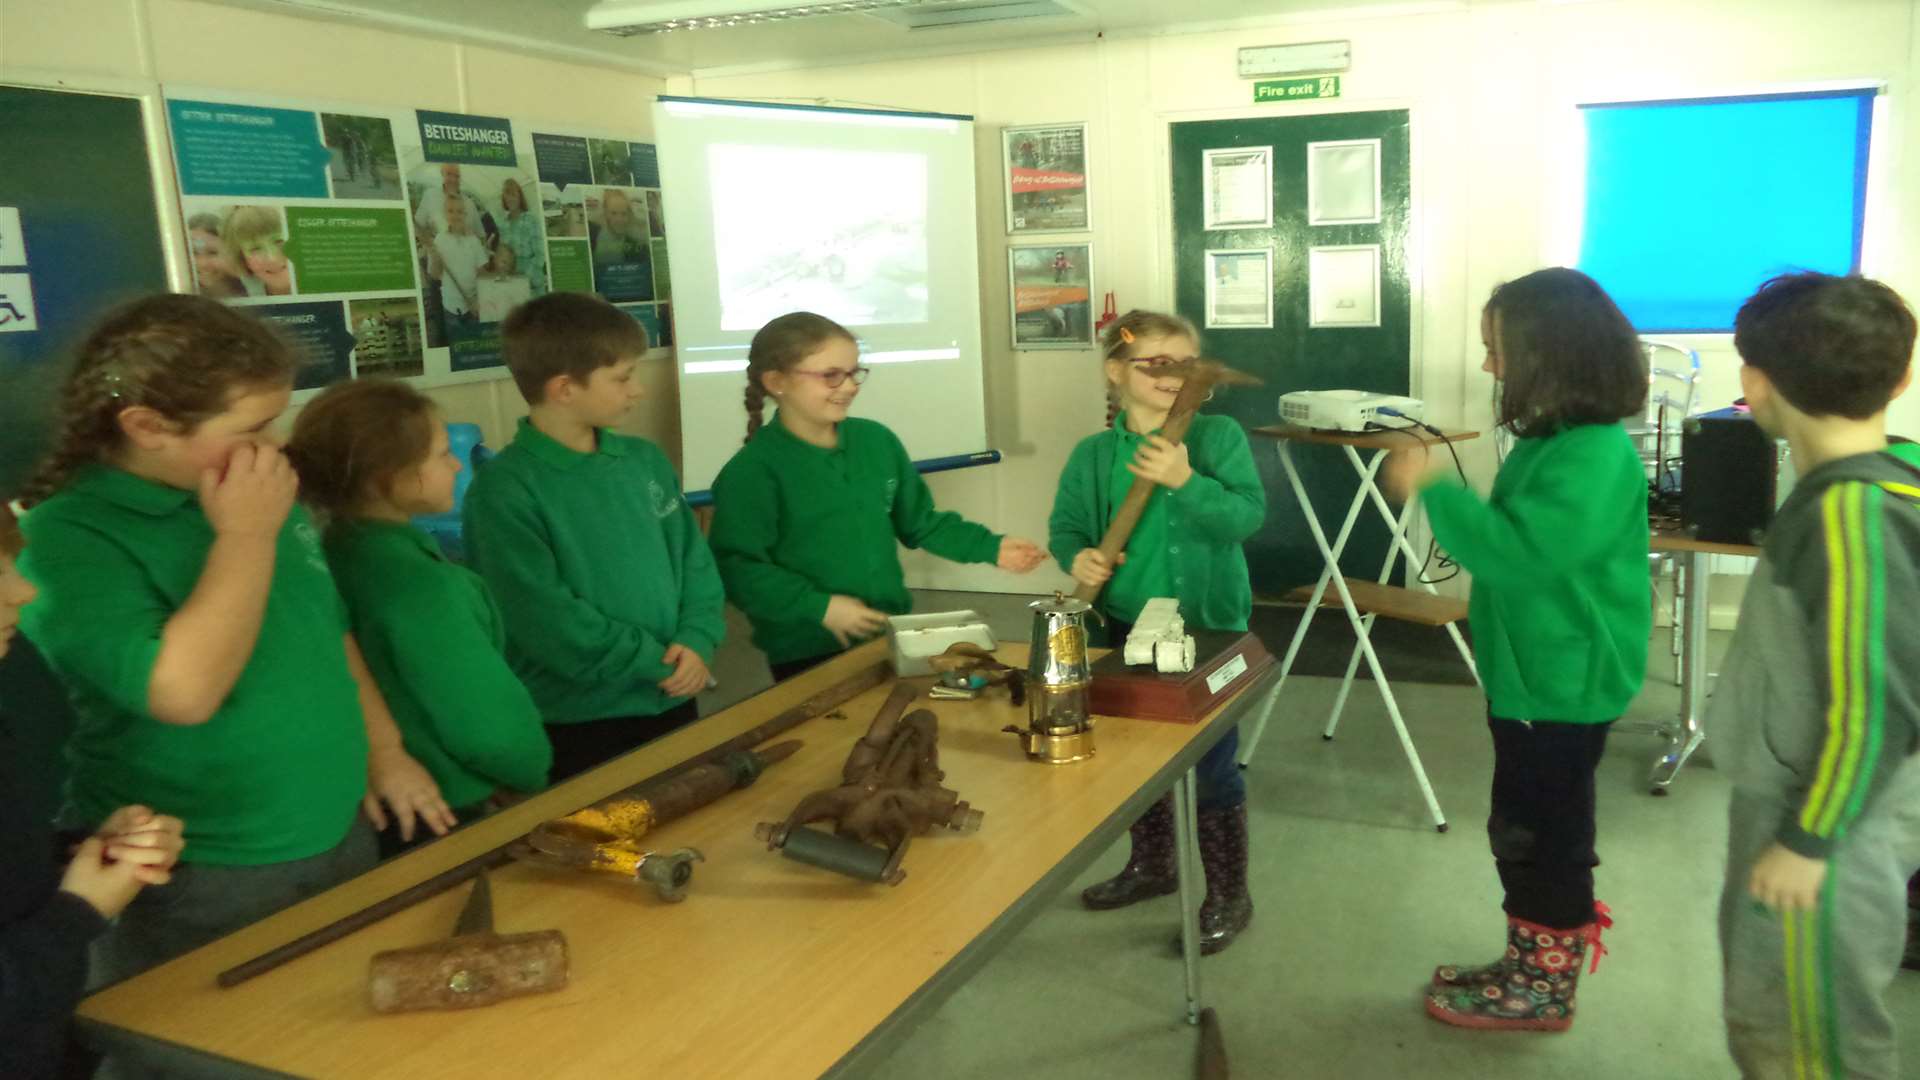 Hornbeam Primary School pupils looked at mining artefacts at Betteshanger Country Park in Sholden near Deal